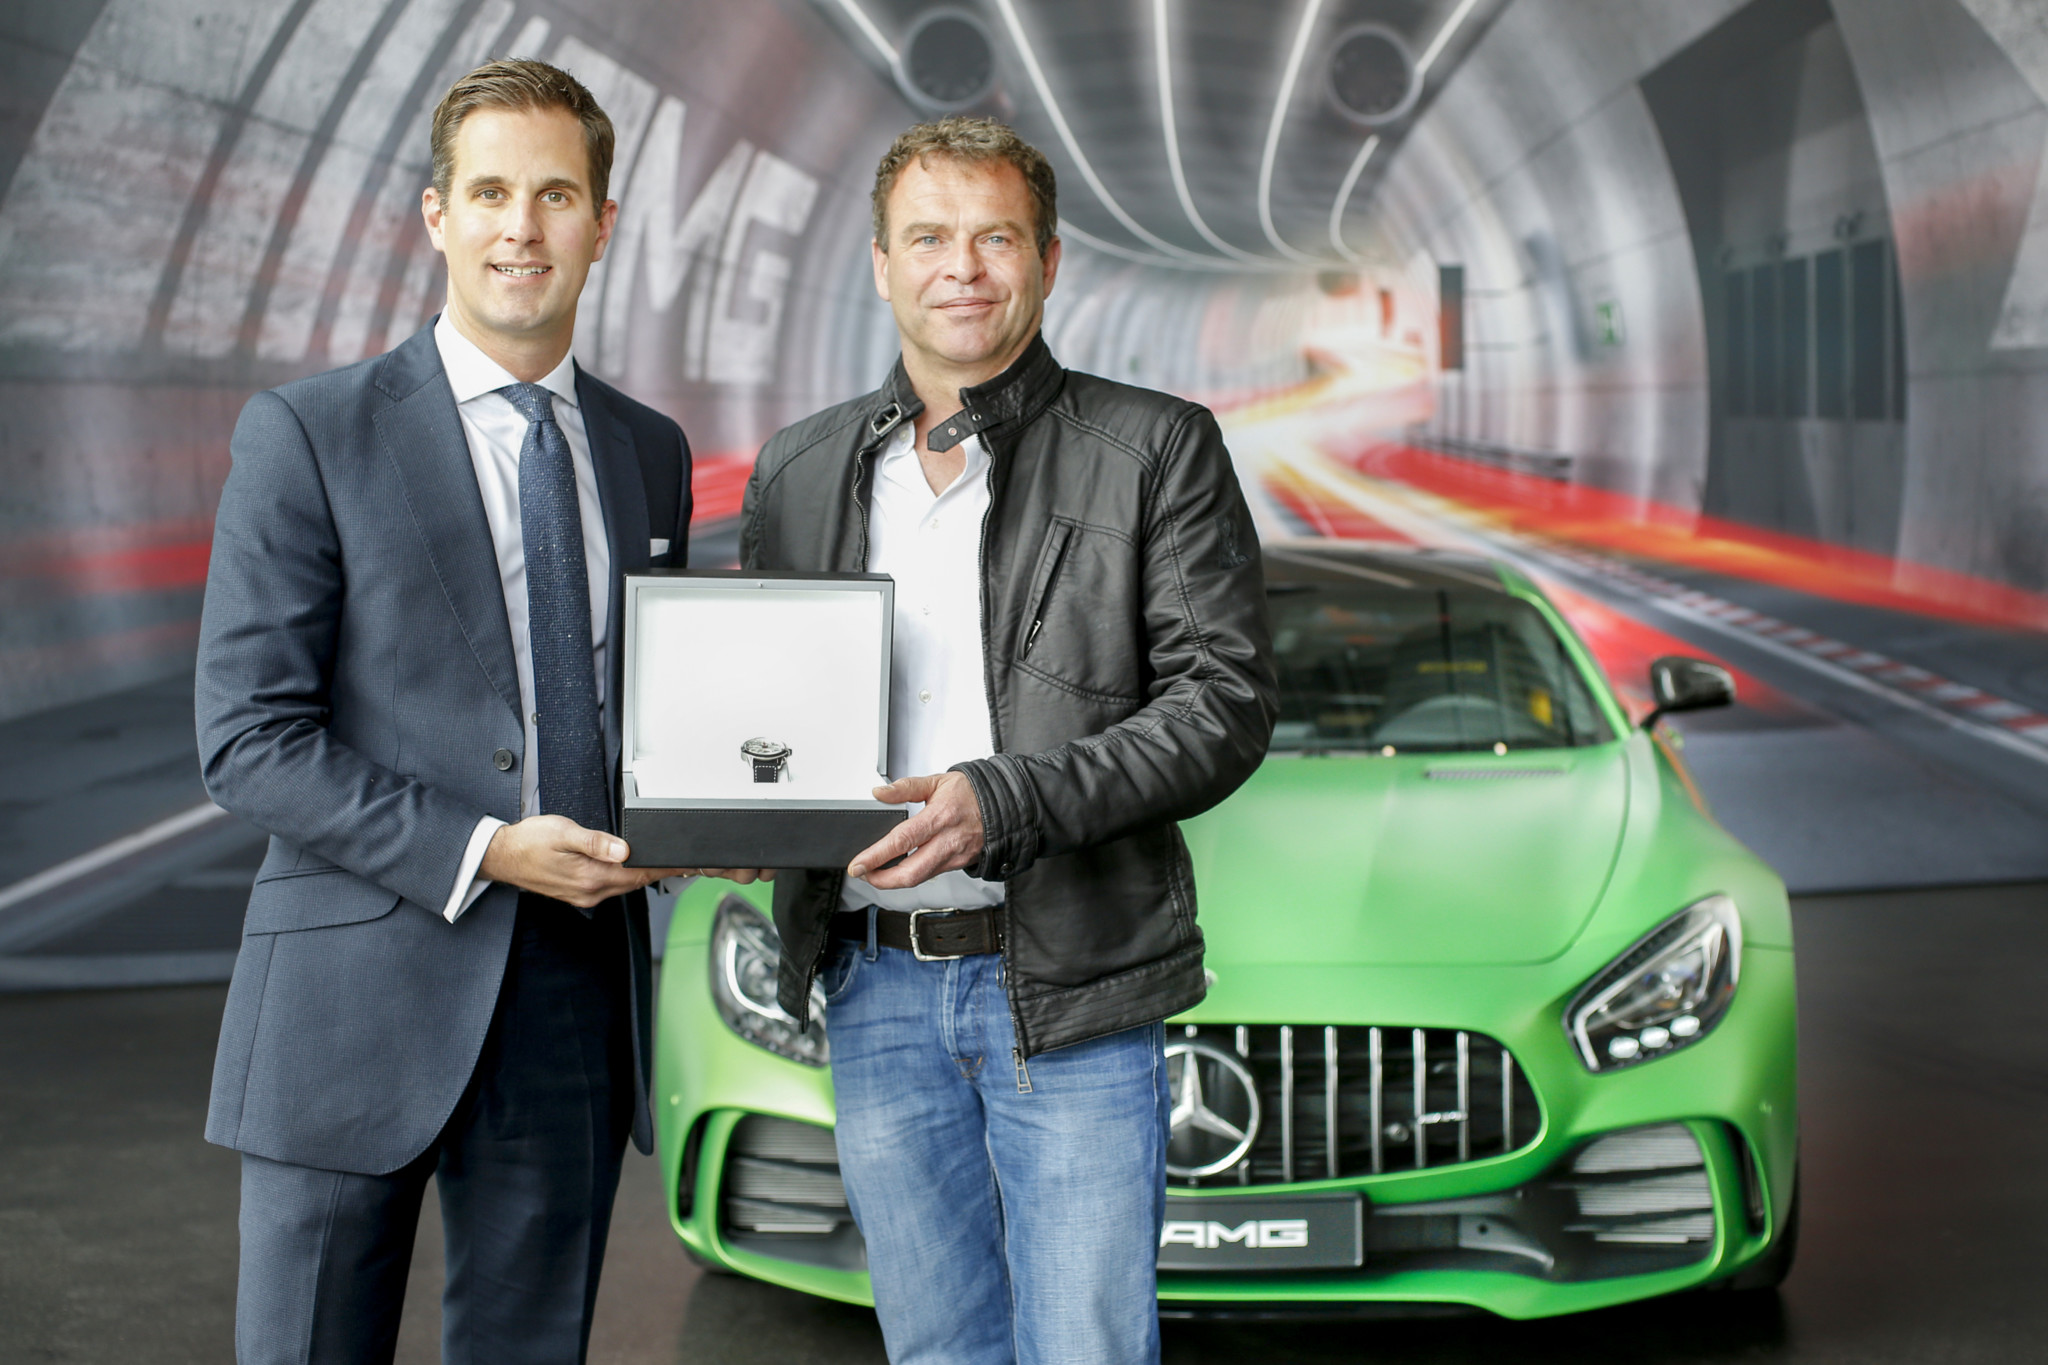 Iwc ceo christoph grainger-herr visits the amg manufacture in affalterbach and hands over the ingenieur chronograph sport edition "50th anniversary of mercedes-amg" to amg ceo tobias moers.